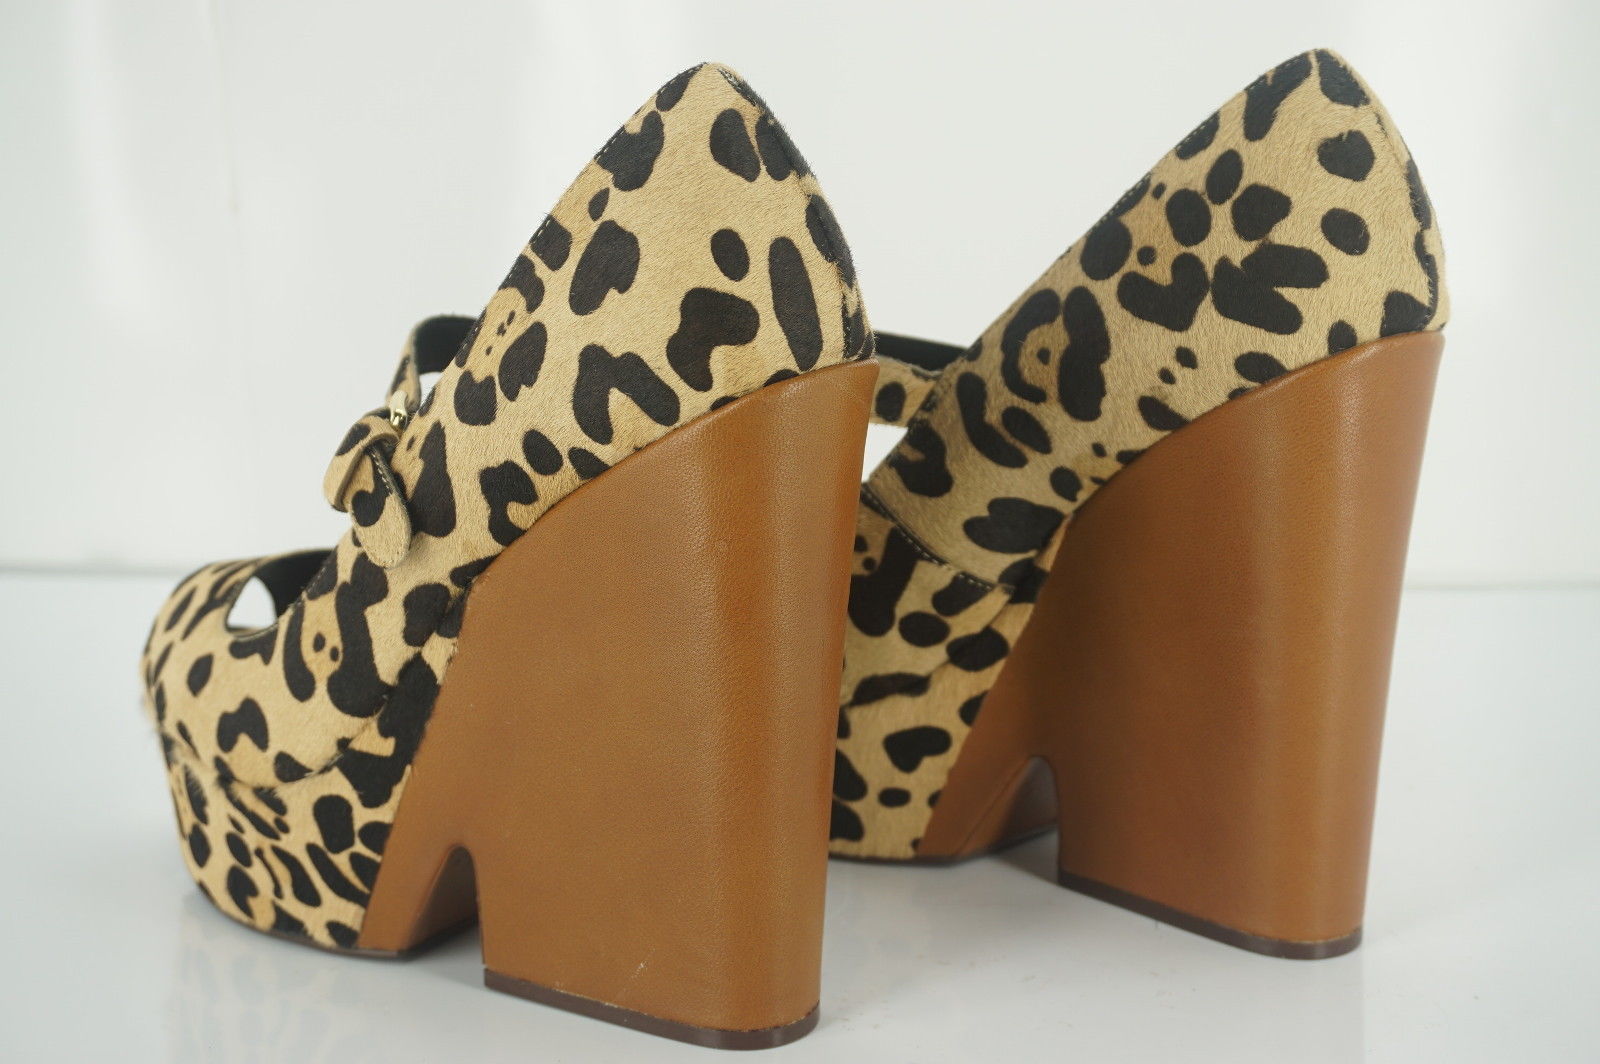 Steve Madden Leopard Hair Knockout Mary Jane Pump Size 8 New Wedge Open Toe$200